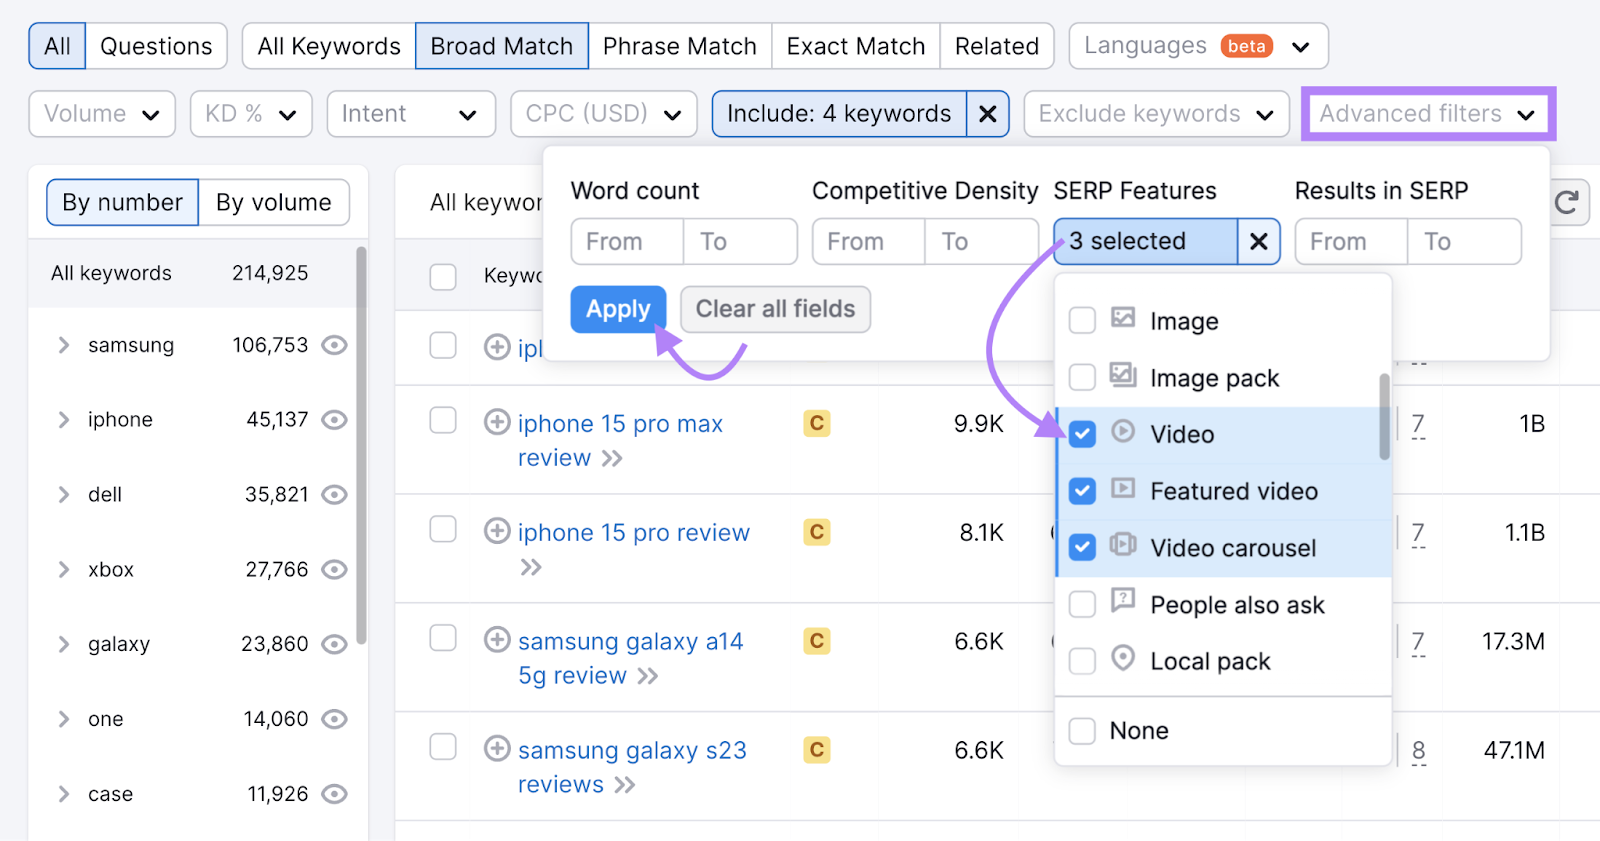 "Video," "Featured video," and "Carousel video" options selected from the "SERP features" drop-down menu in the "Advanced filters" section of Keyword Magic Tool